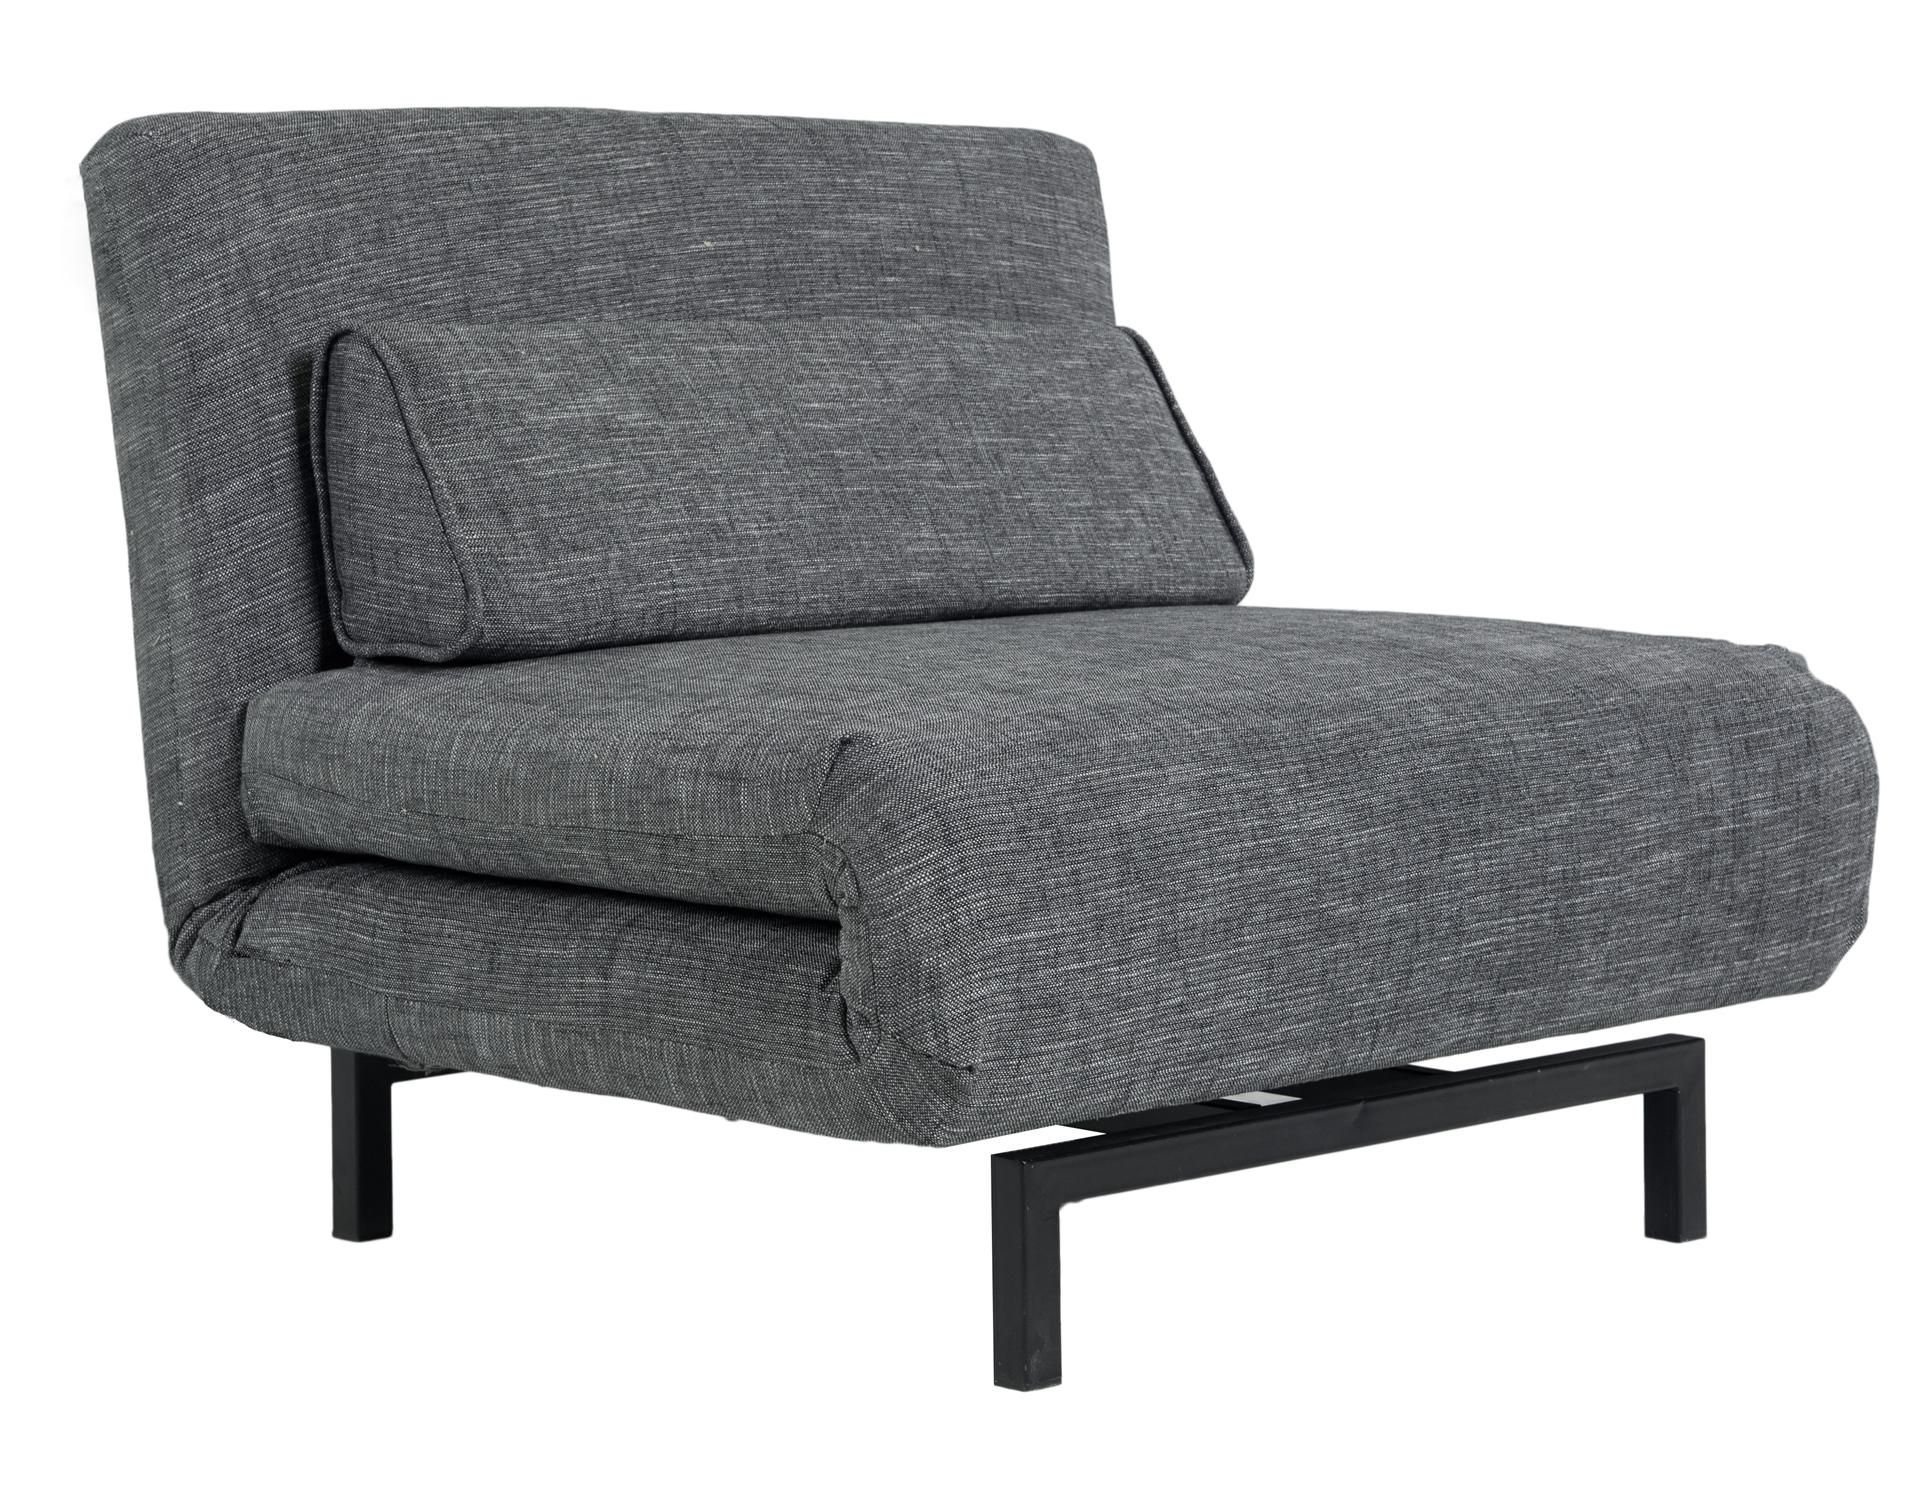 Sofas Center Magnificent Foldable Sofa Chair Picture Design Dsc With Regard To Folding Sofa Chairs (View 5 of 15)